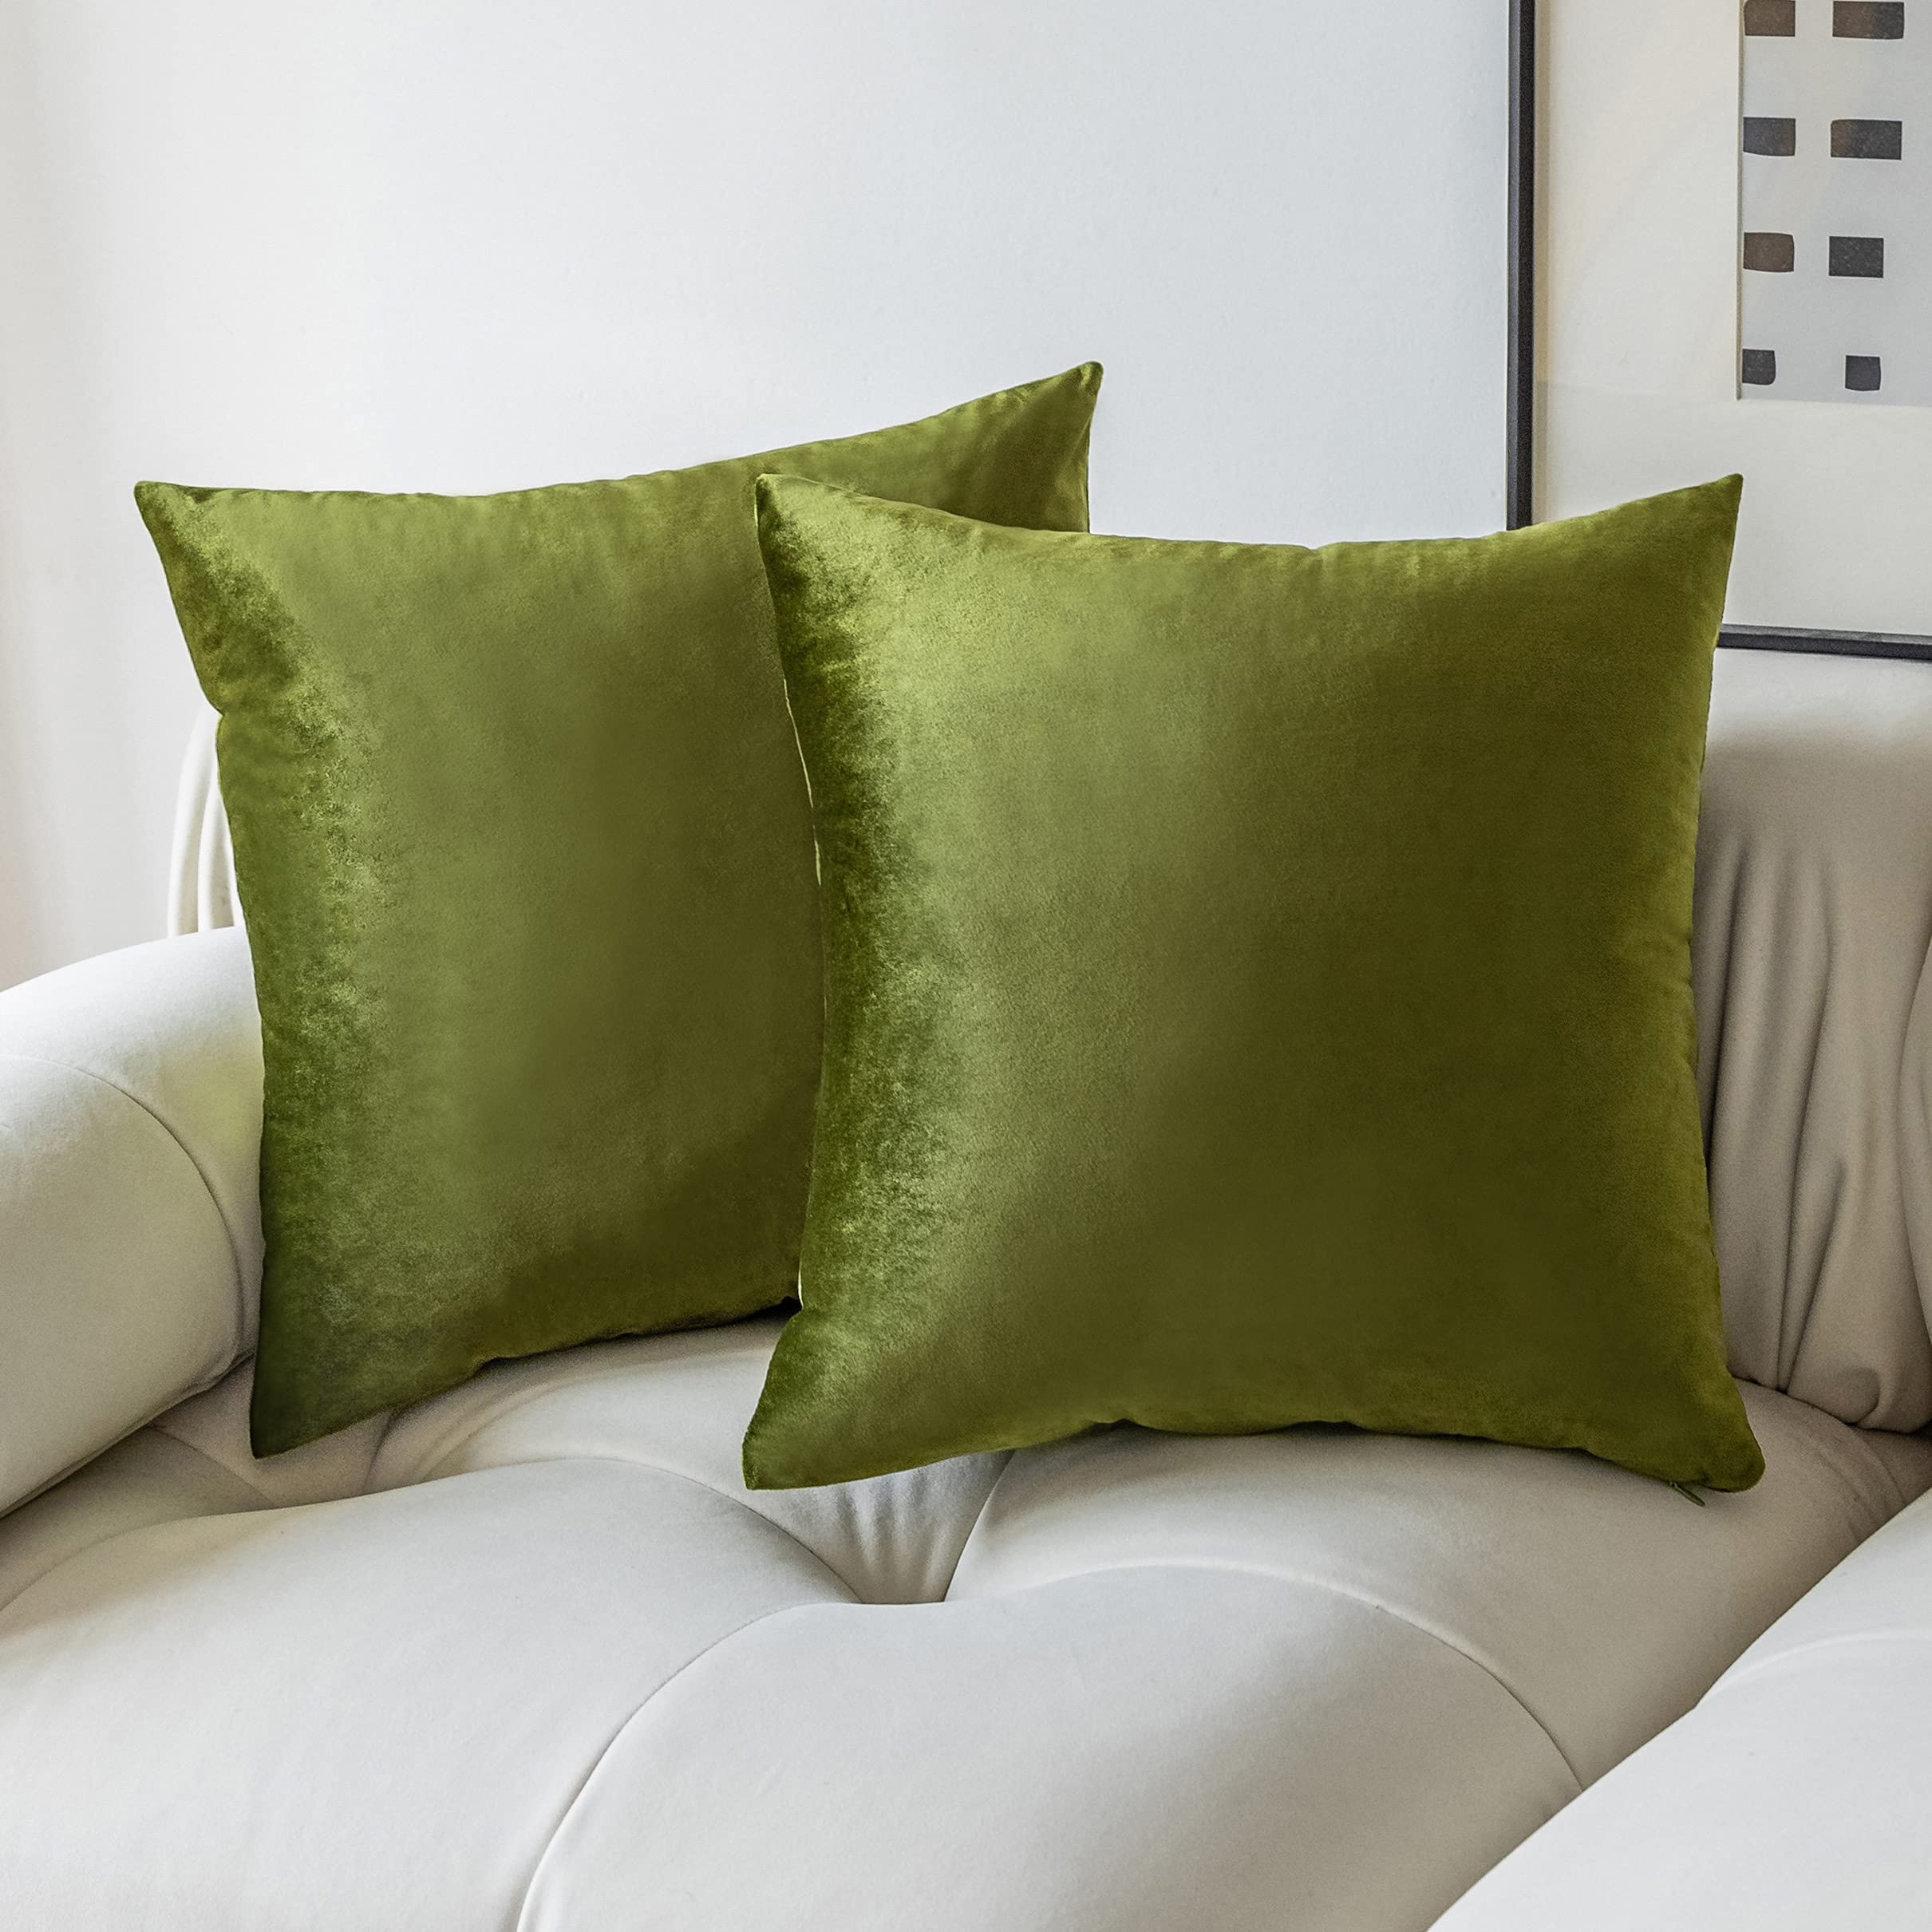 Demetex Green Pillow Covers 18x18 Soft Luxury Velvet Throw Pillows for Couch Square Decorative Olive Accent Pillow Covers for So